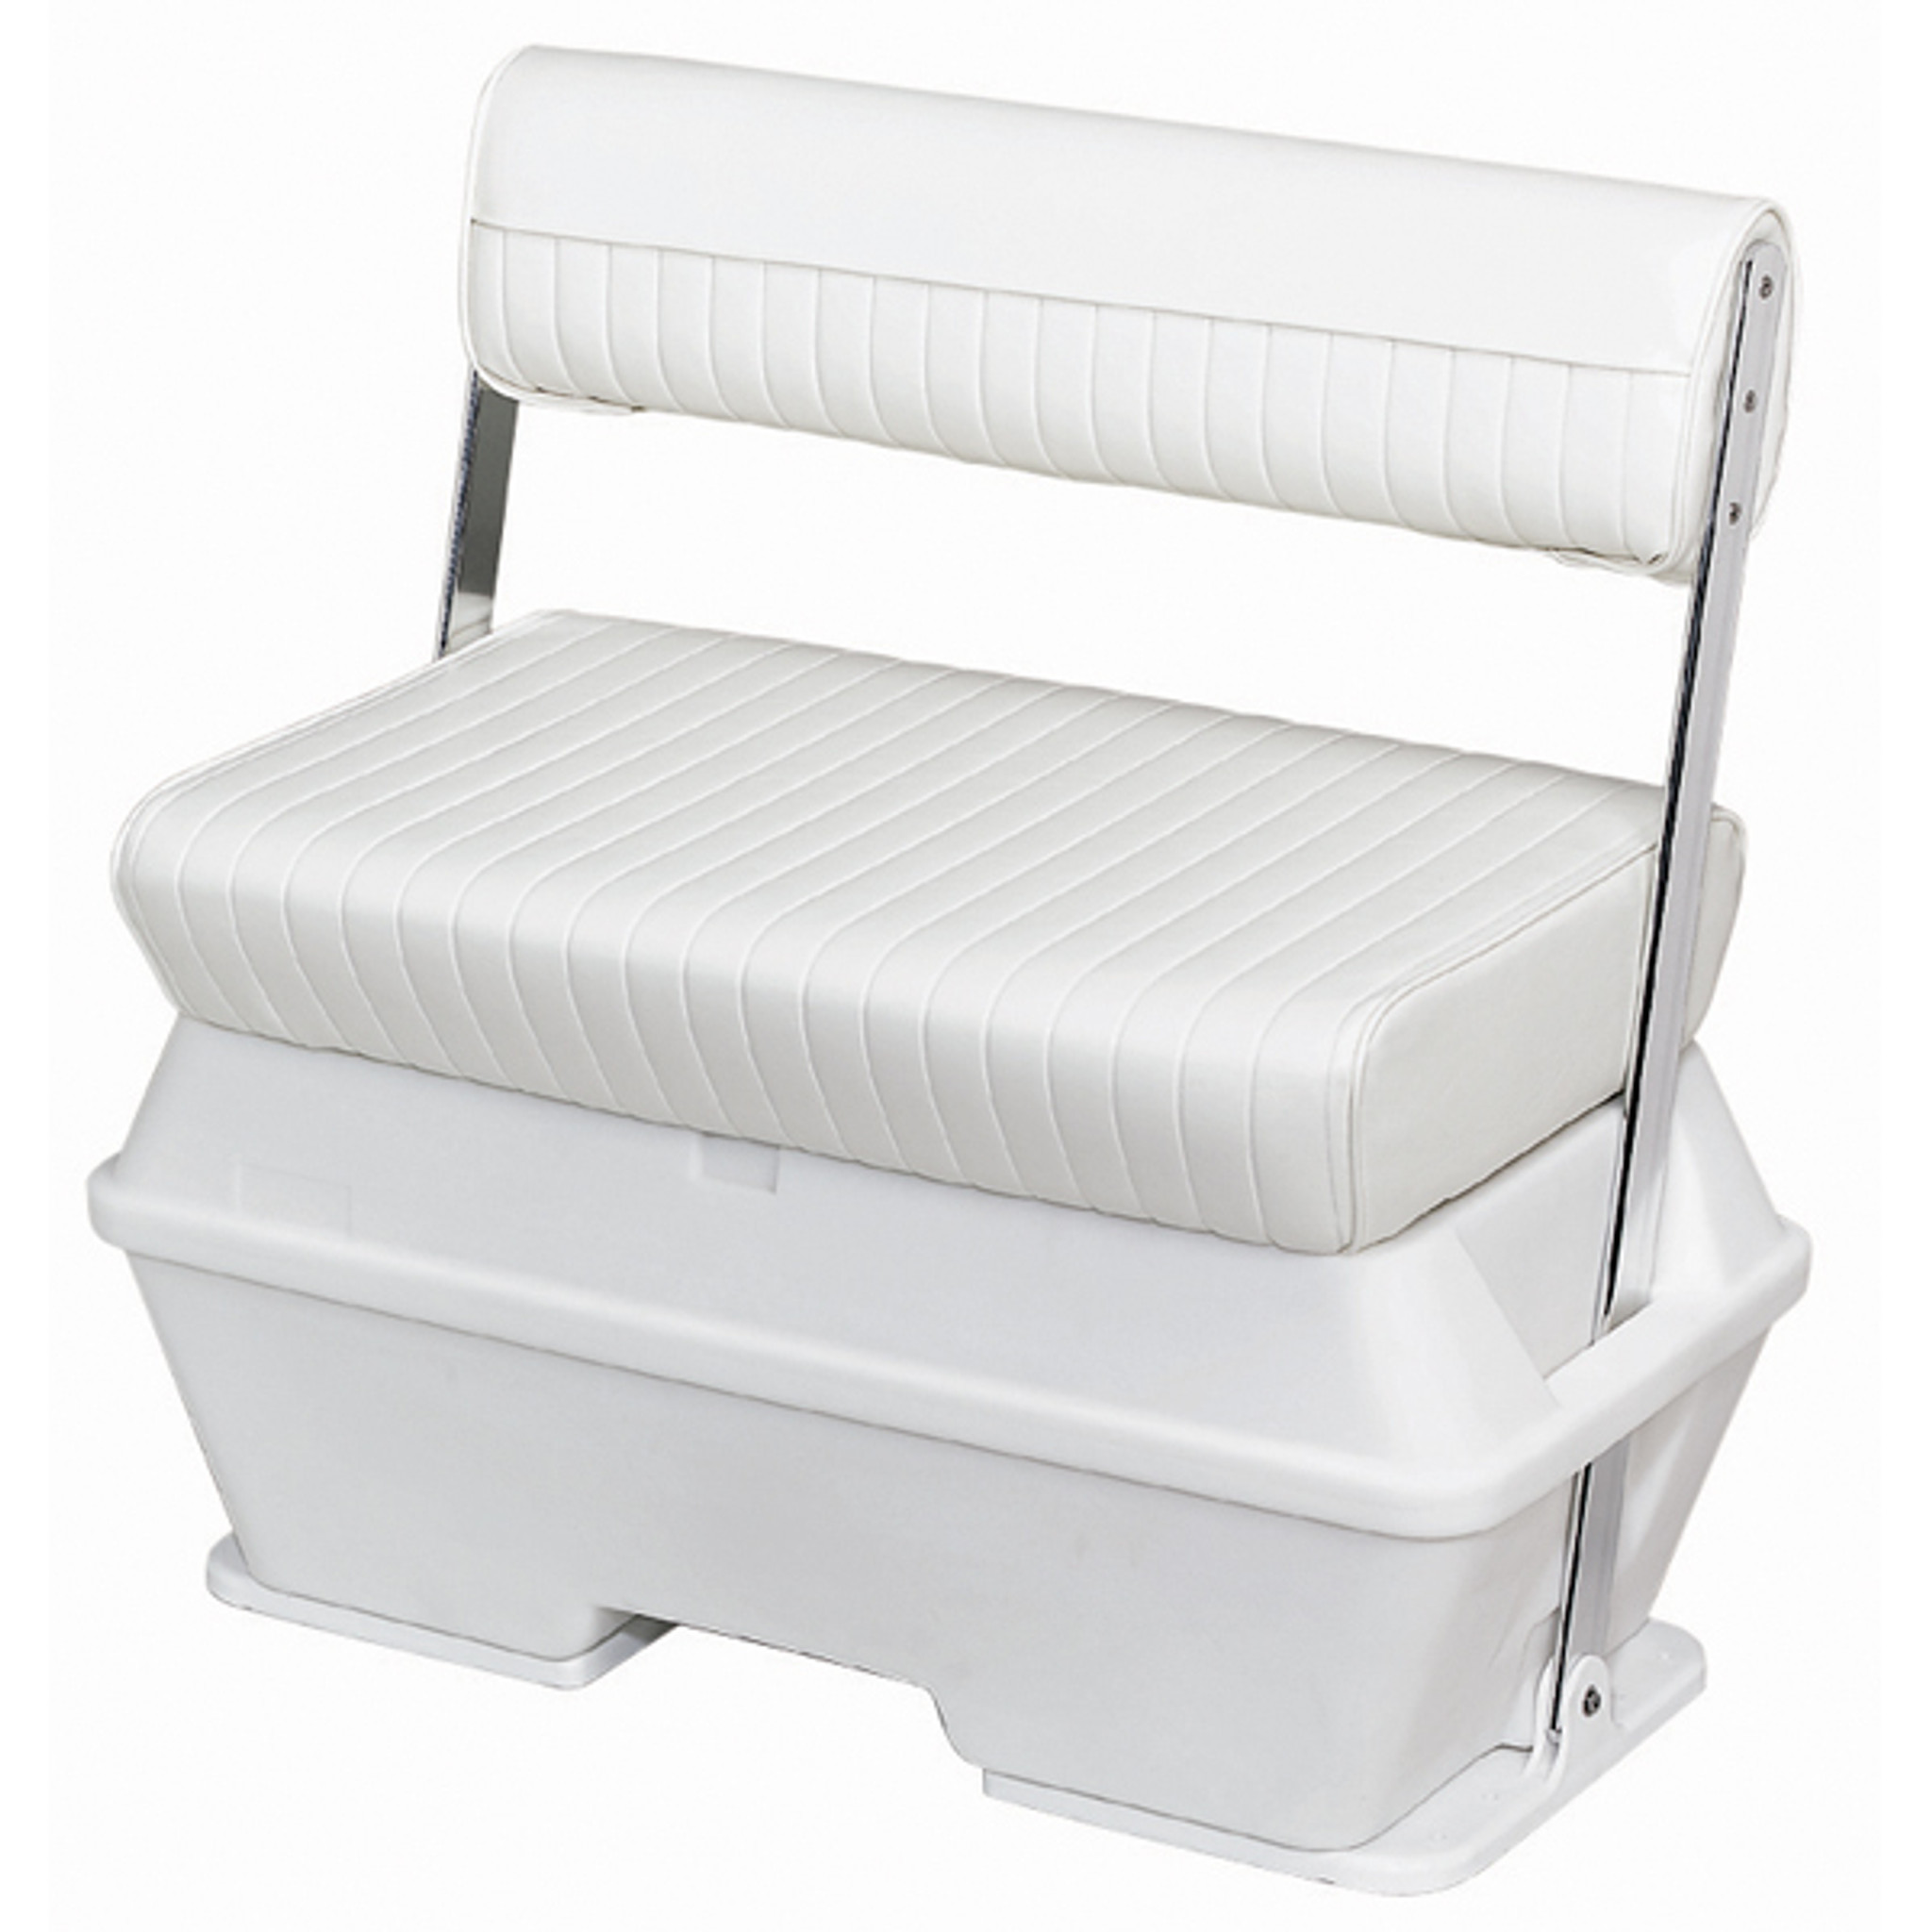 https://cdn11.bigcommerce.com/s-5inmj/images/stencil/2048x2048/products/181/449/wise_swingback_cooler_seat__49351.1436290826.jpg?c=2